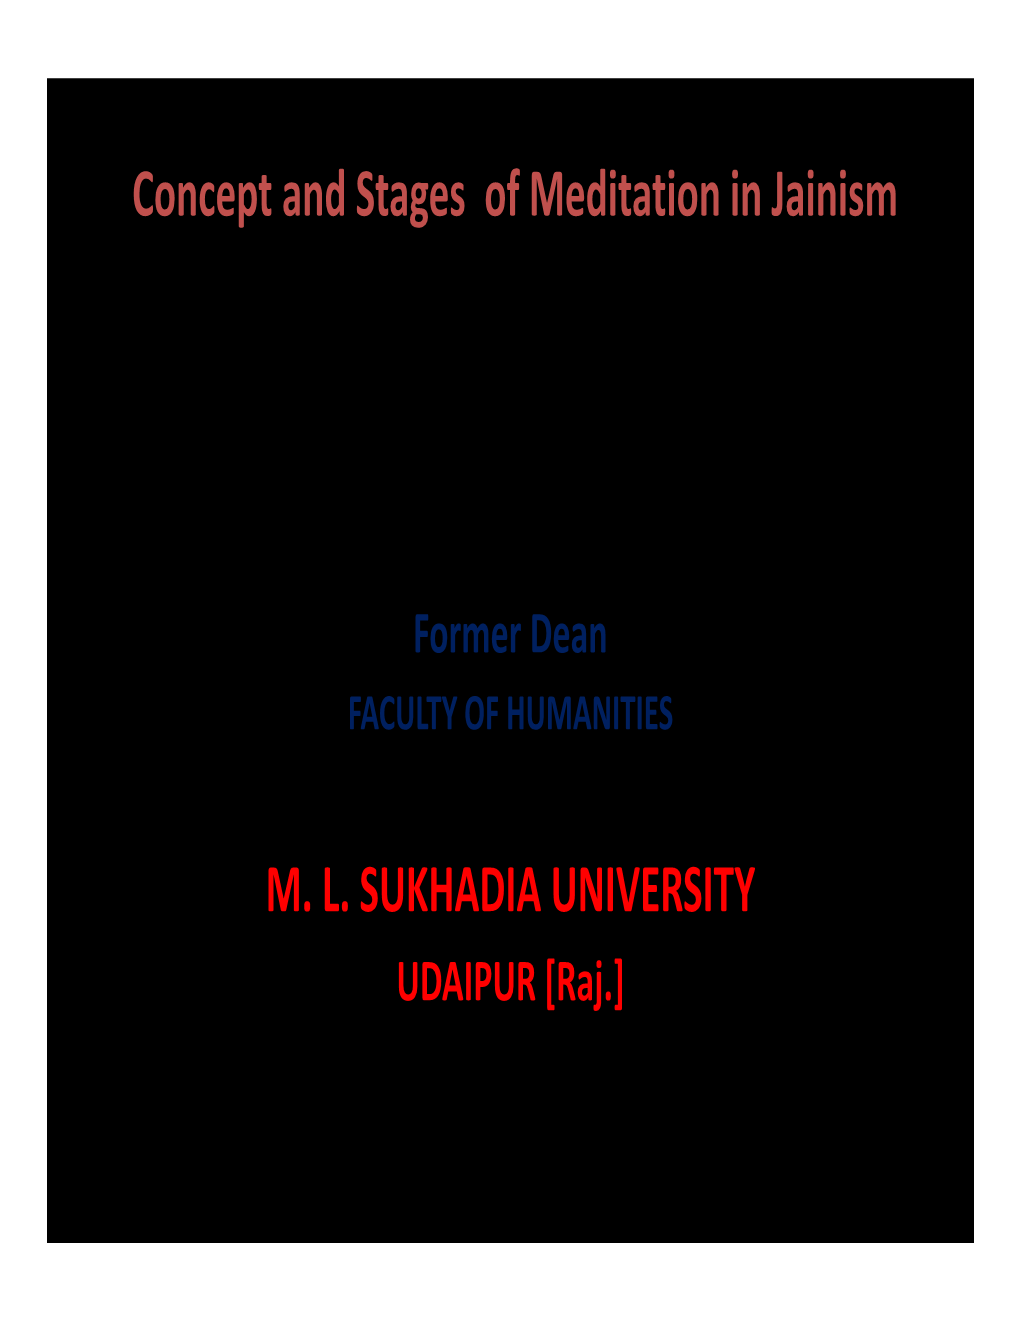 Concept and Stages of Meditation in Jainism